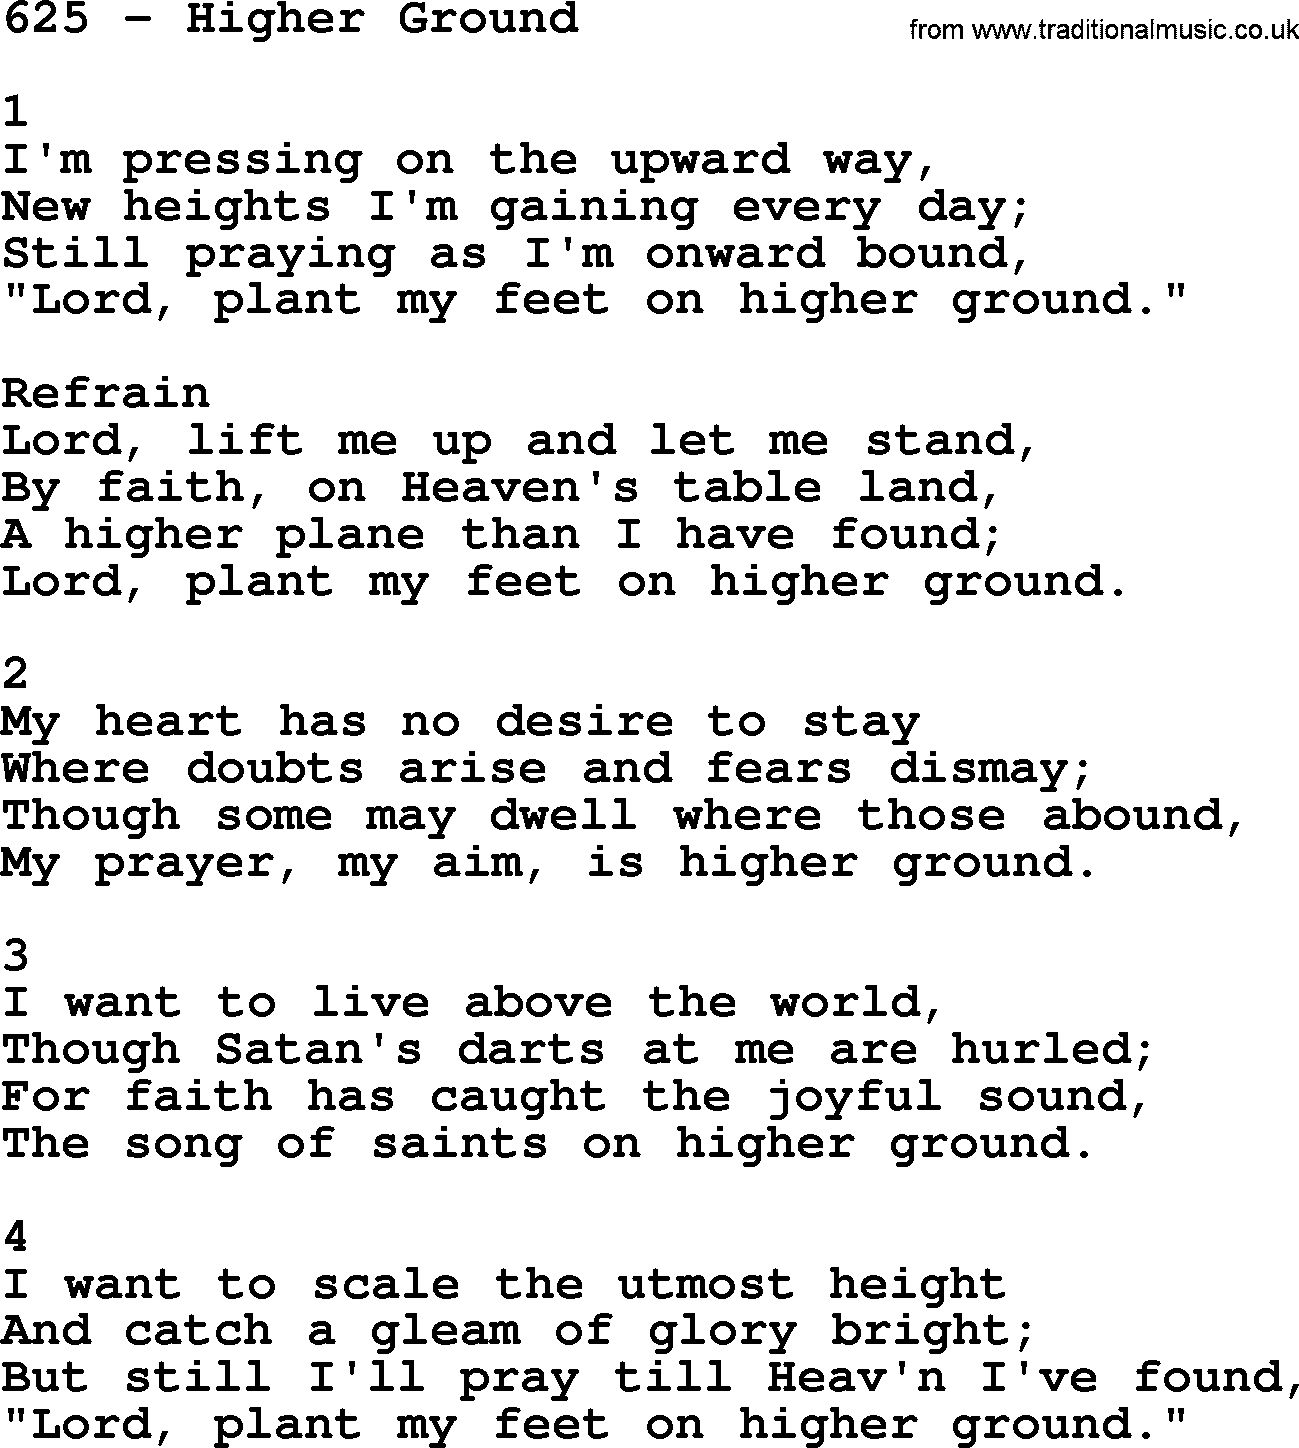 Complete Adventis Hymnal, title: 625-Higher Ground, with lyrics, midi, mp3, powerpoints(PPT) and PDF,